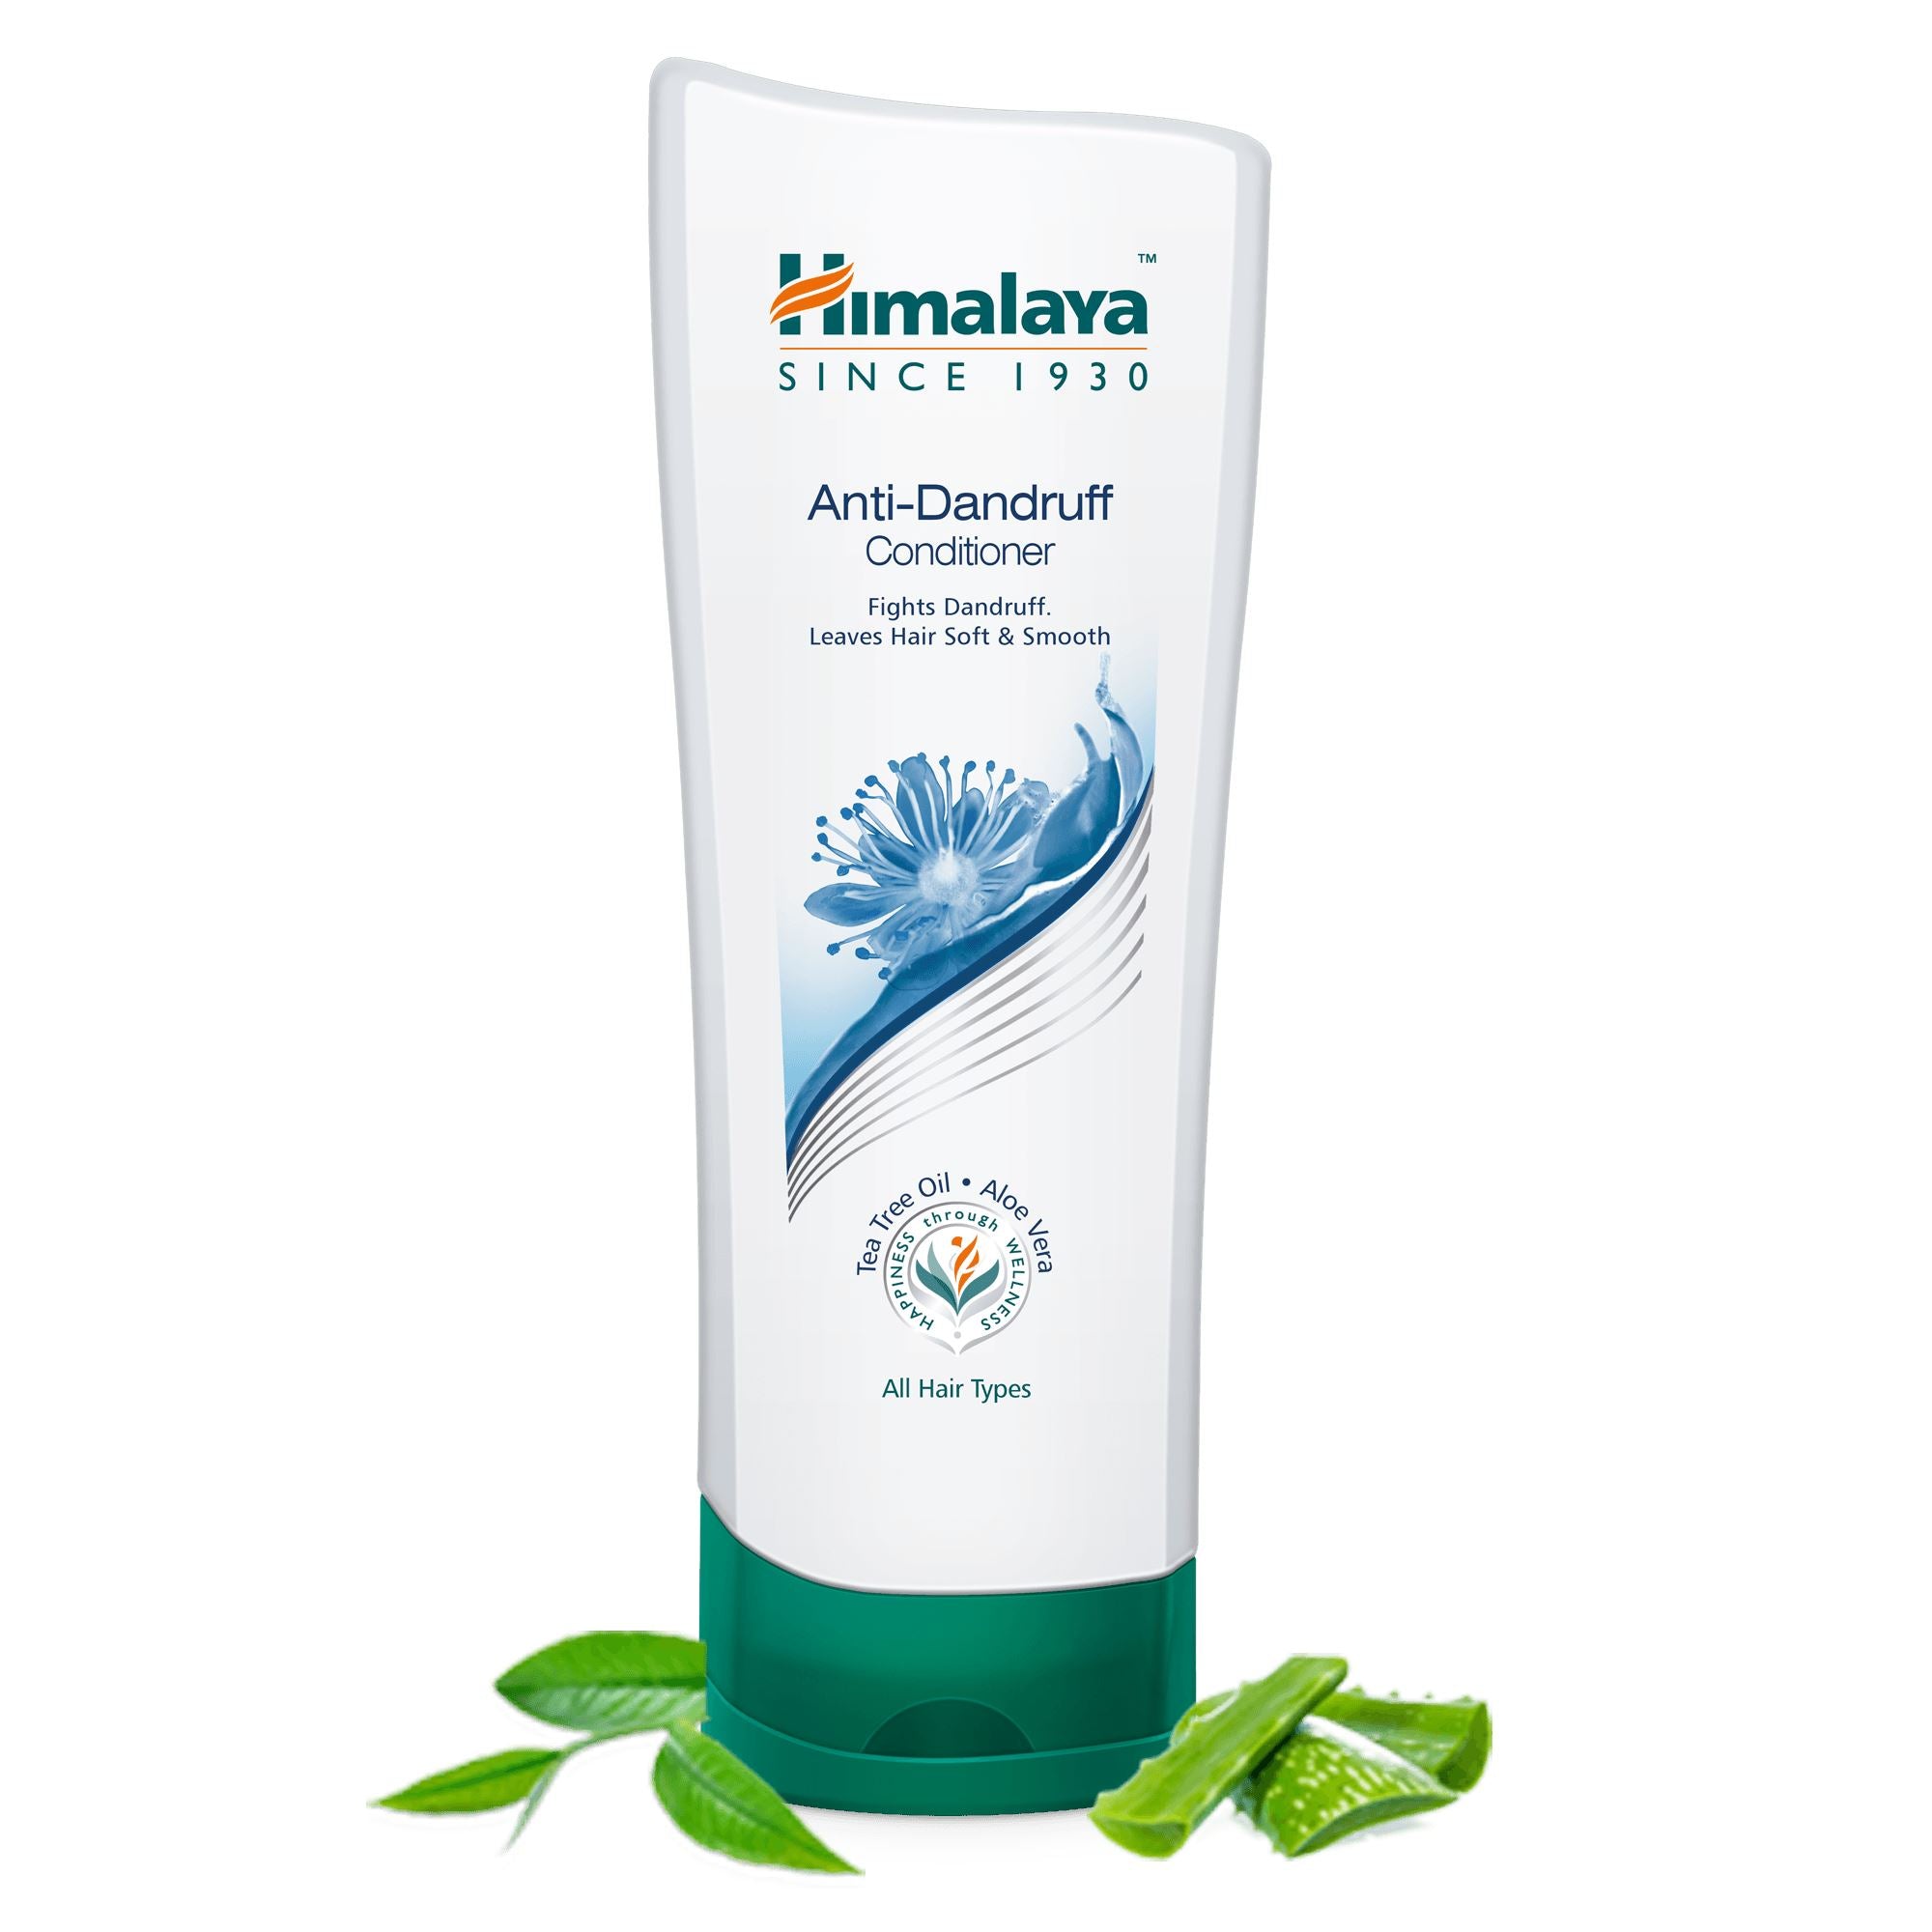 Himalaya Anti-Dandruff Conditioner - Fights dandruff and leaves hair soft and smooth